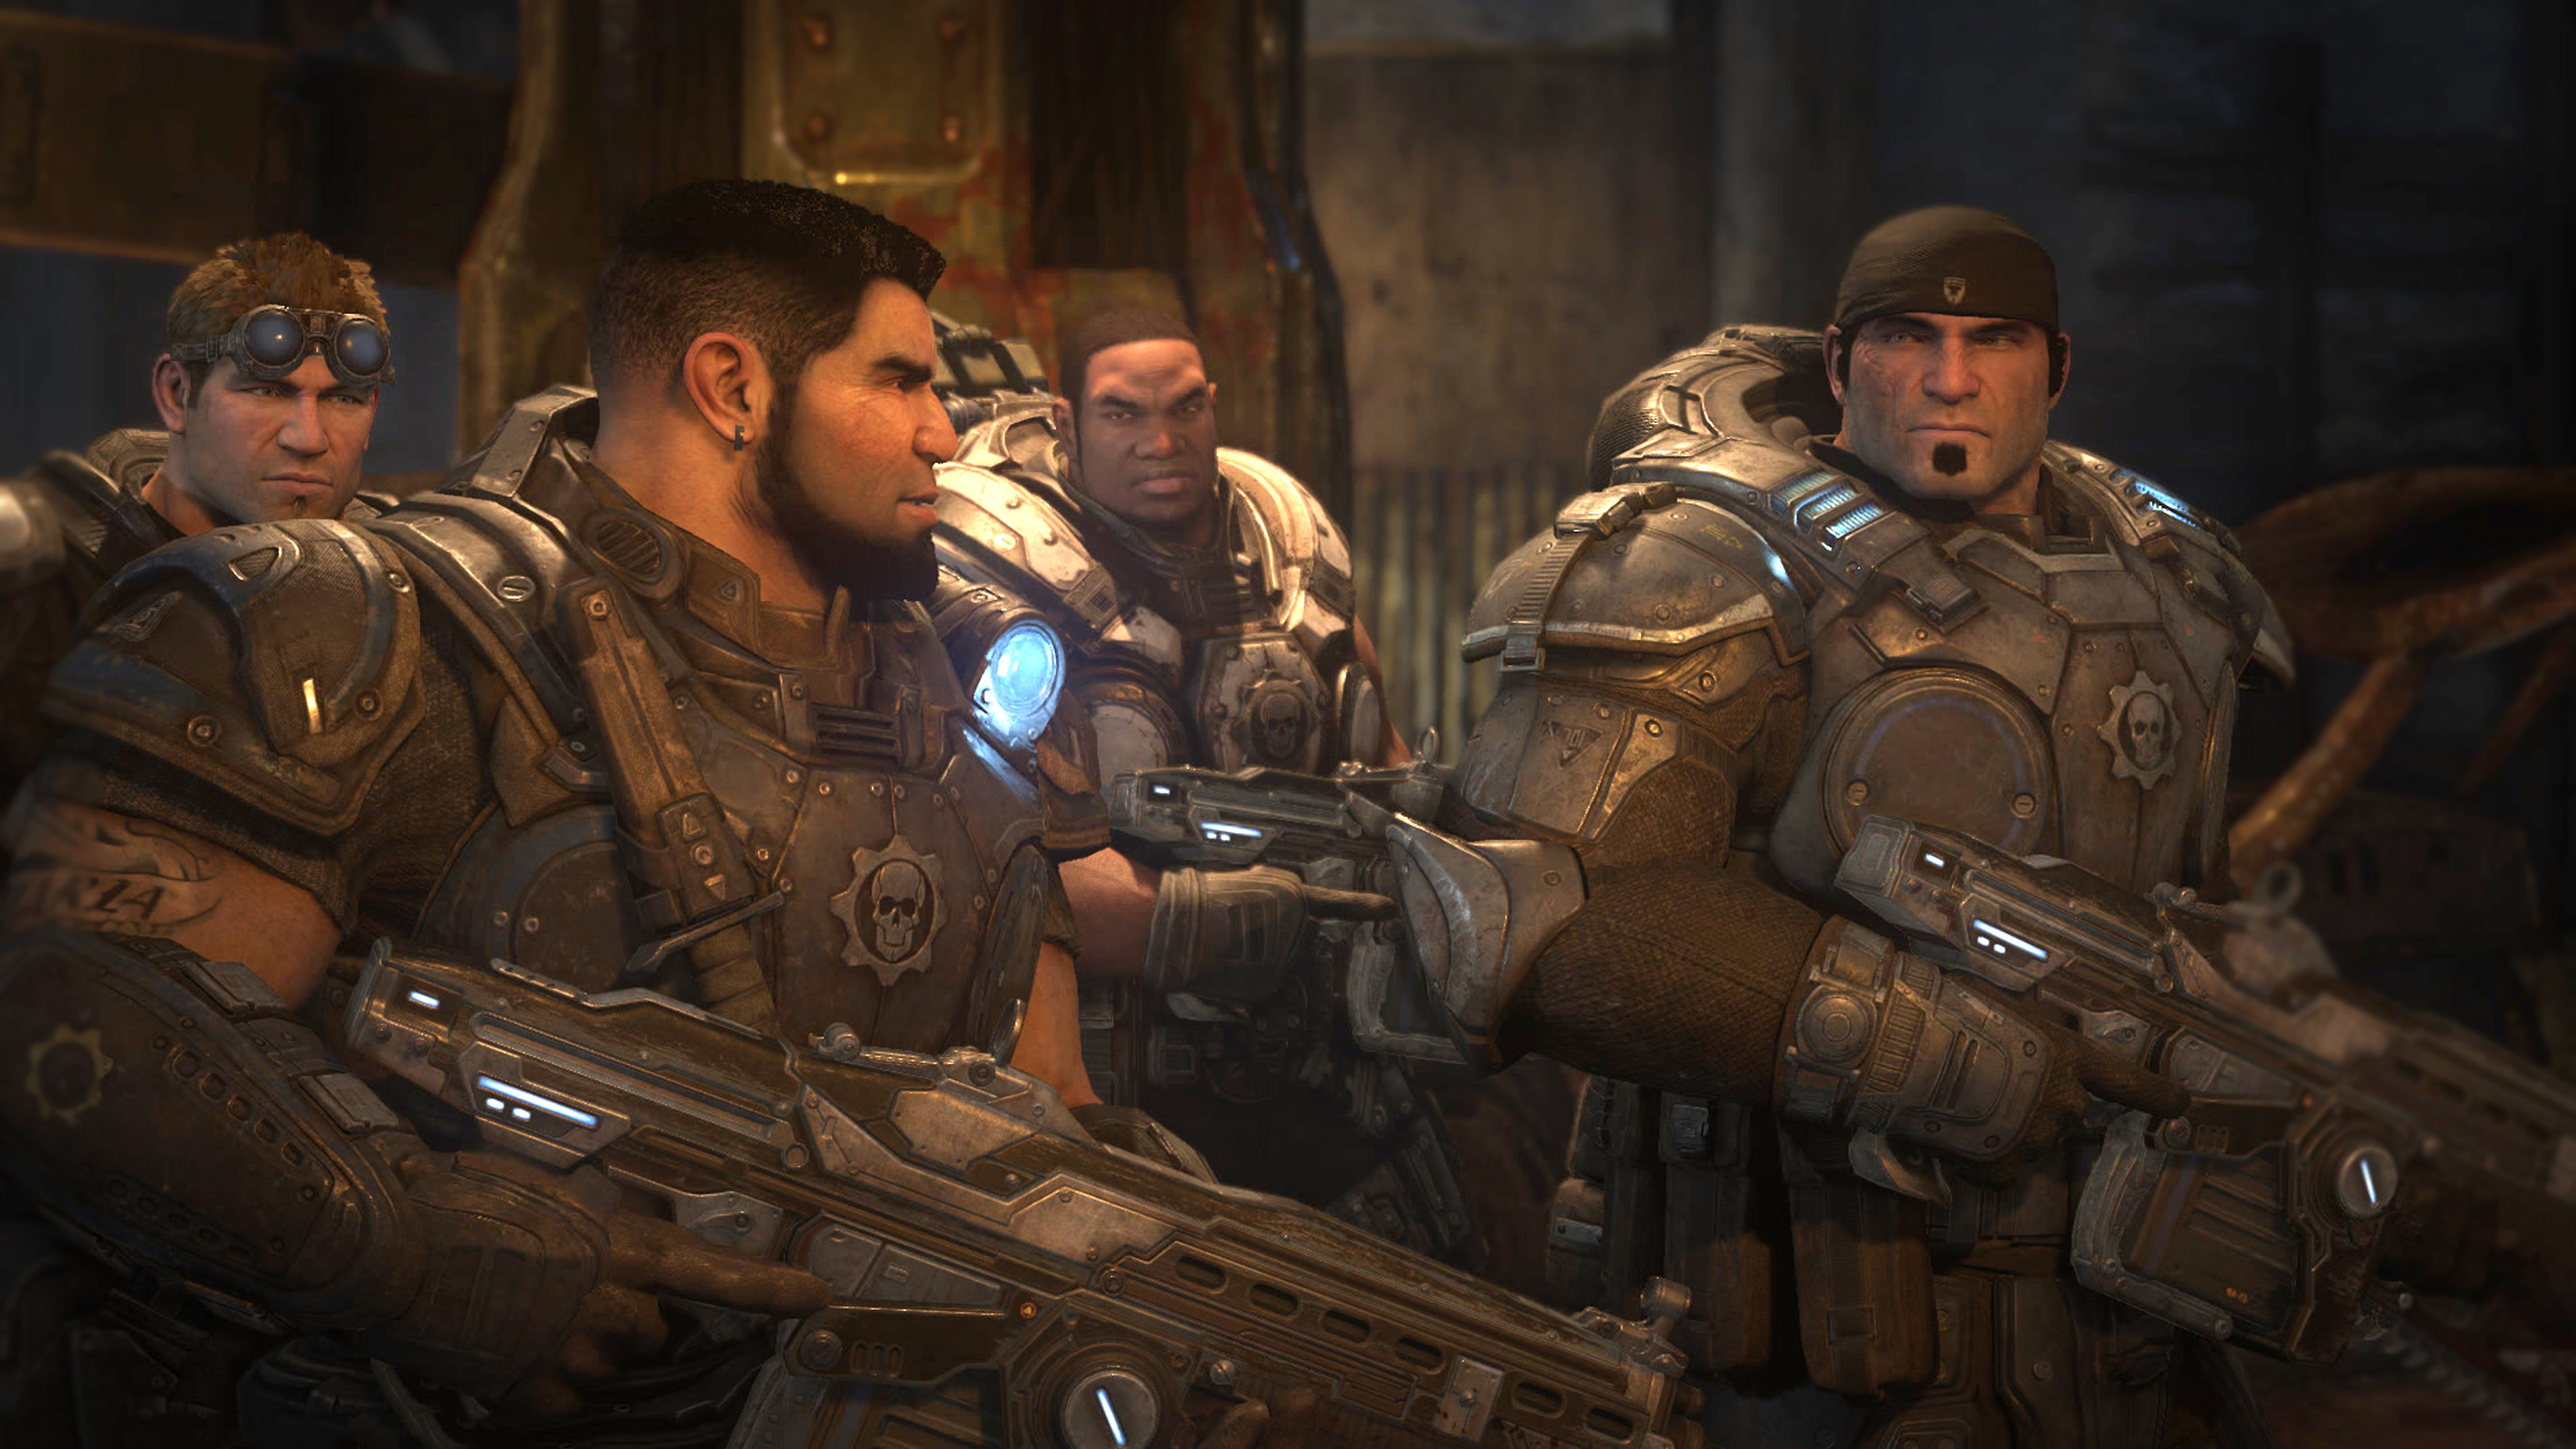 Gears of War 3 Collectibles Locations Guide